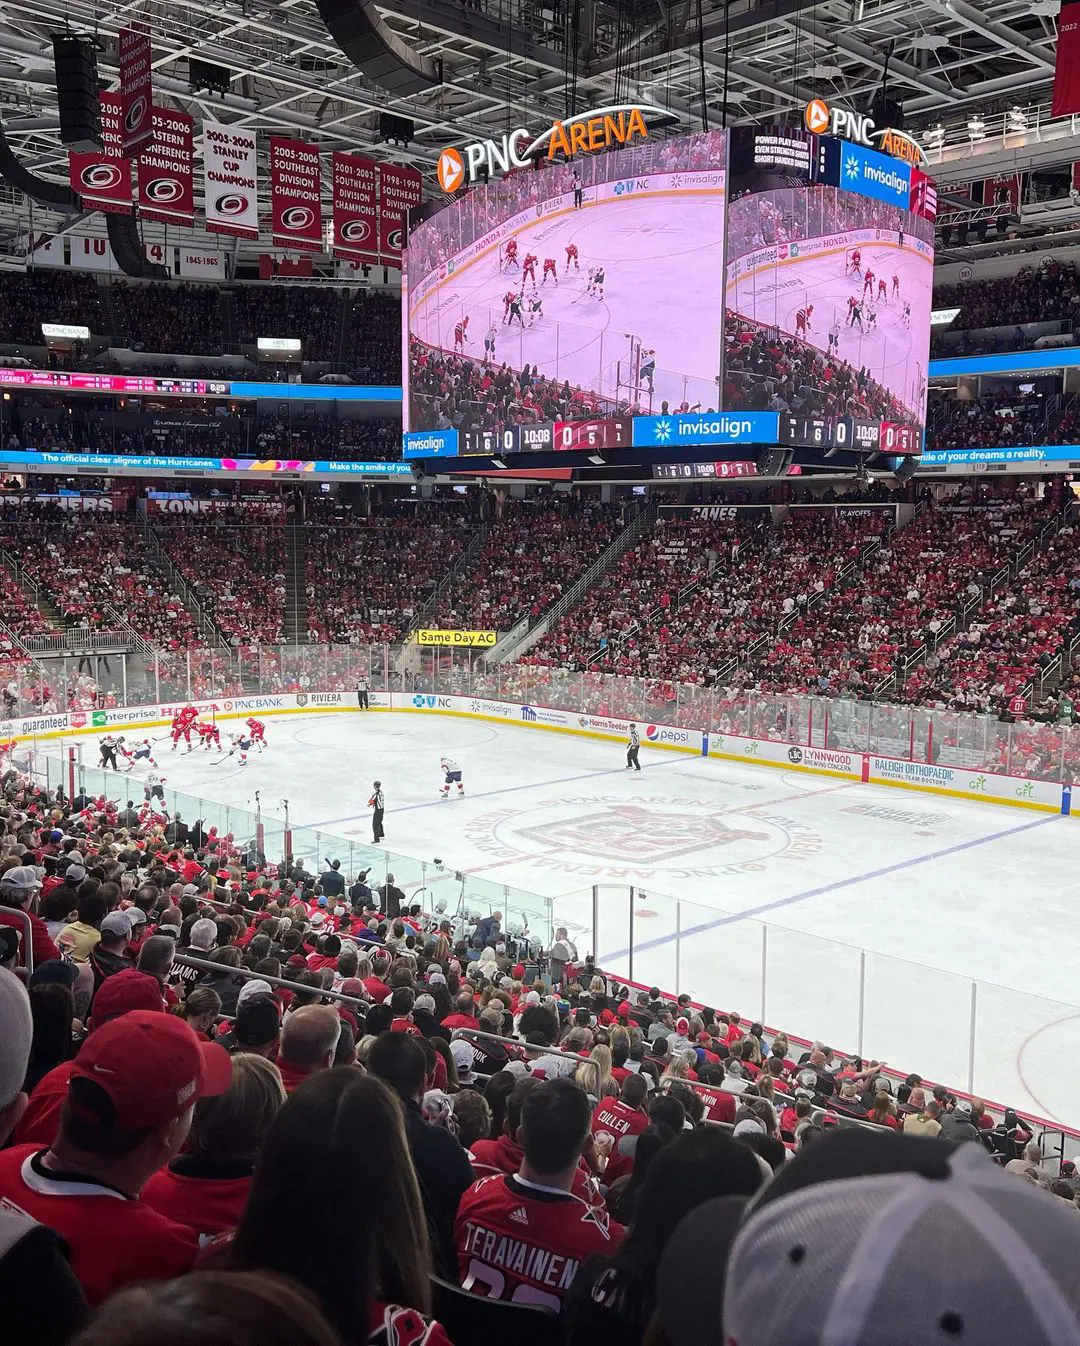 The Florida Panther and the Hurricanes playing . Eastern Conference final playoff series of 2022-23 season